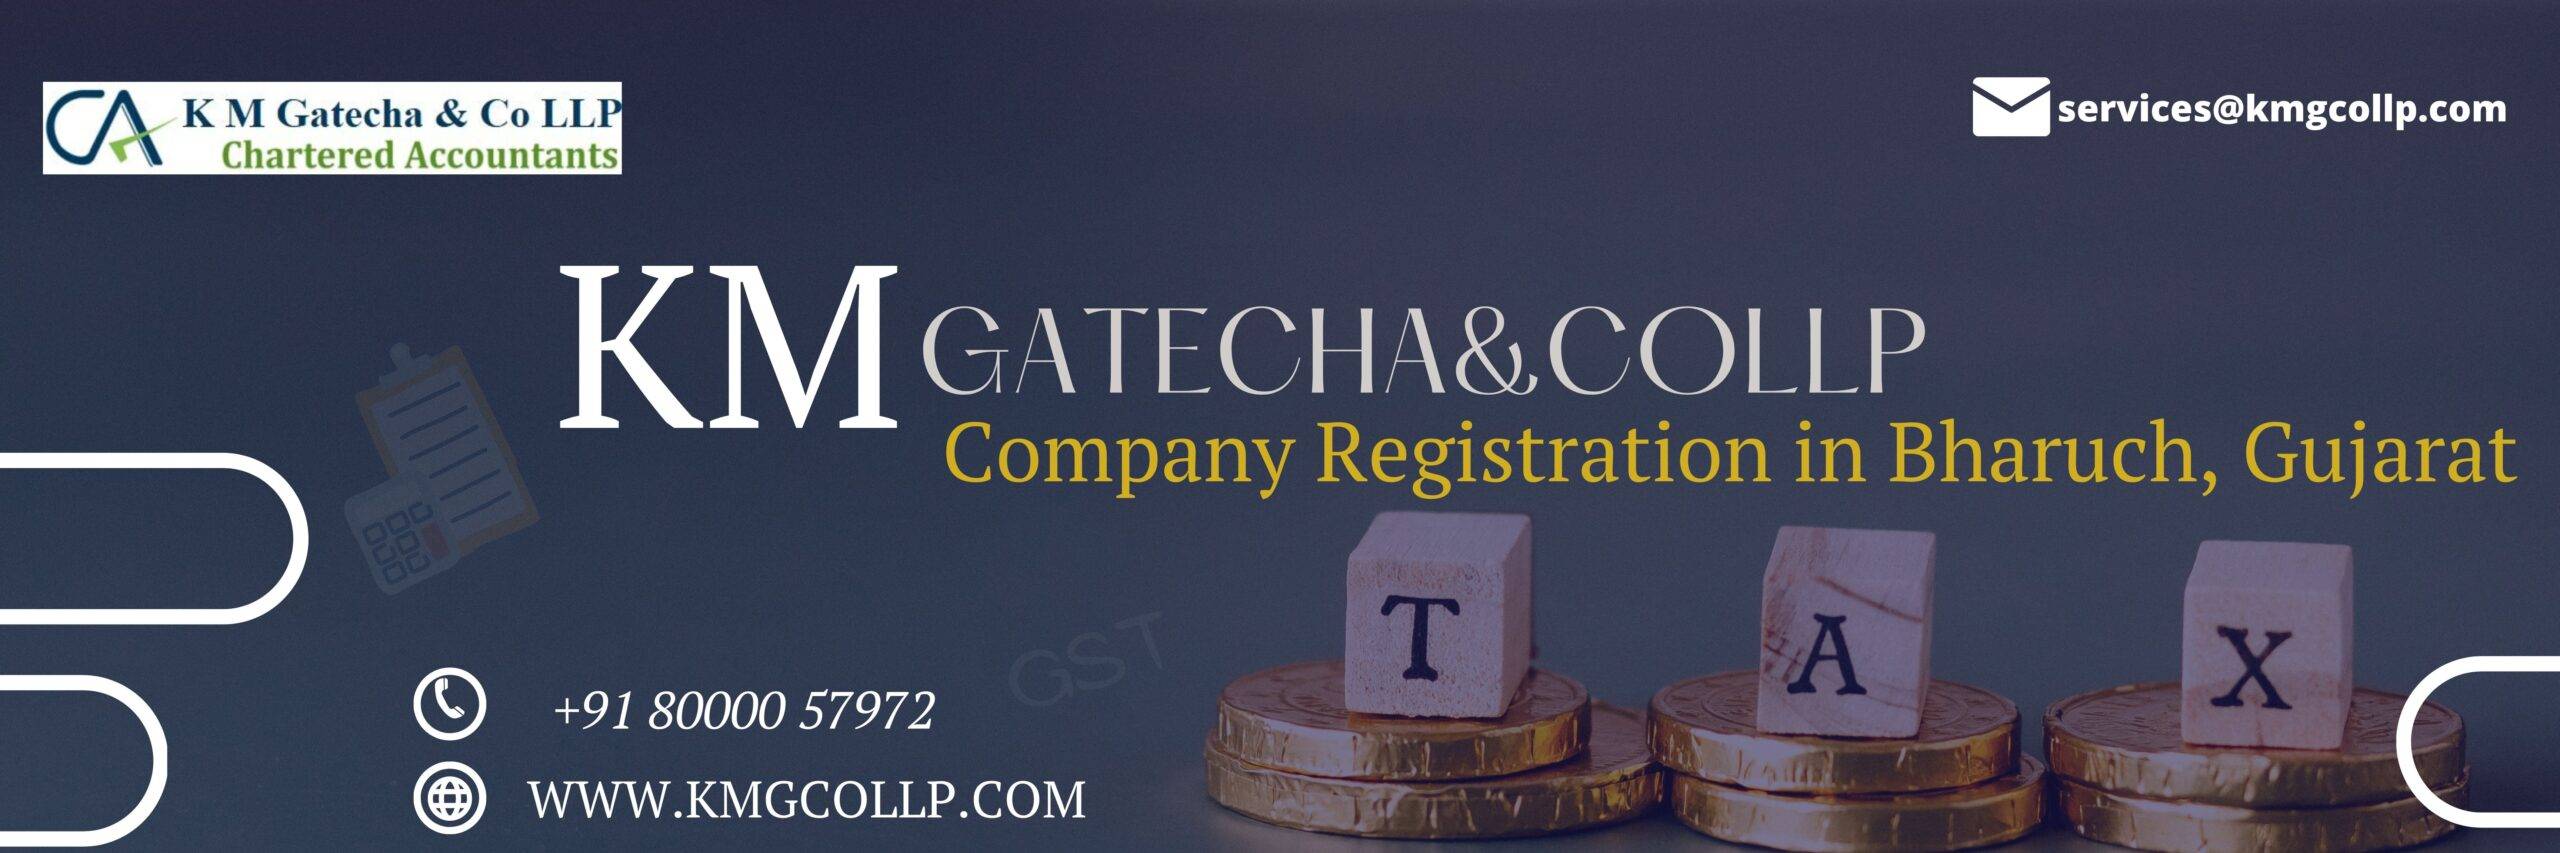 Company Registration in Bharuch